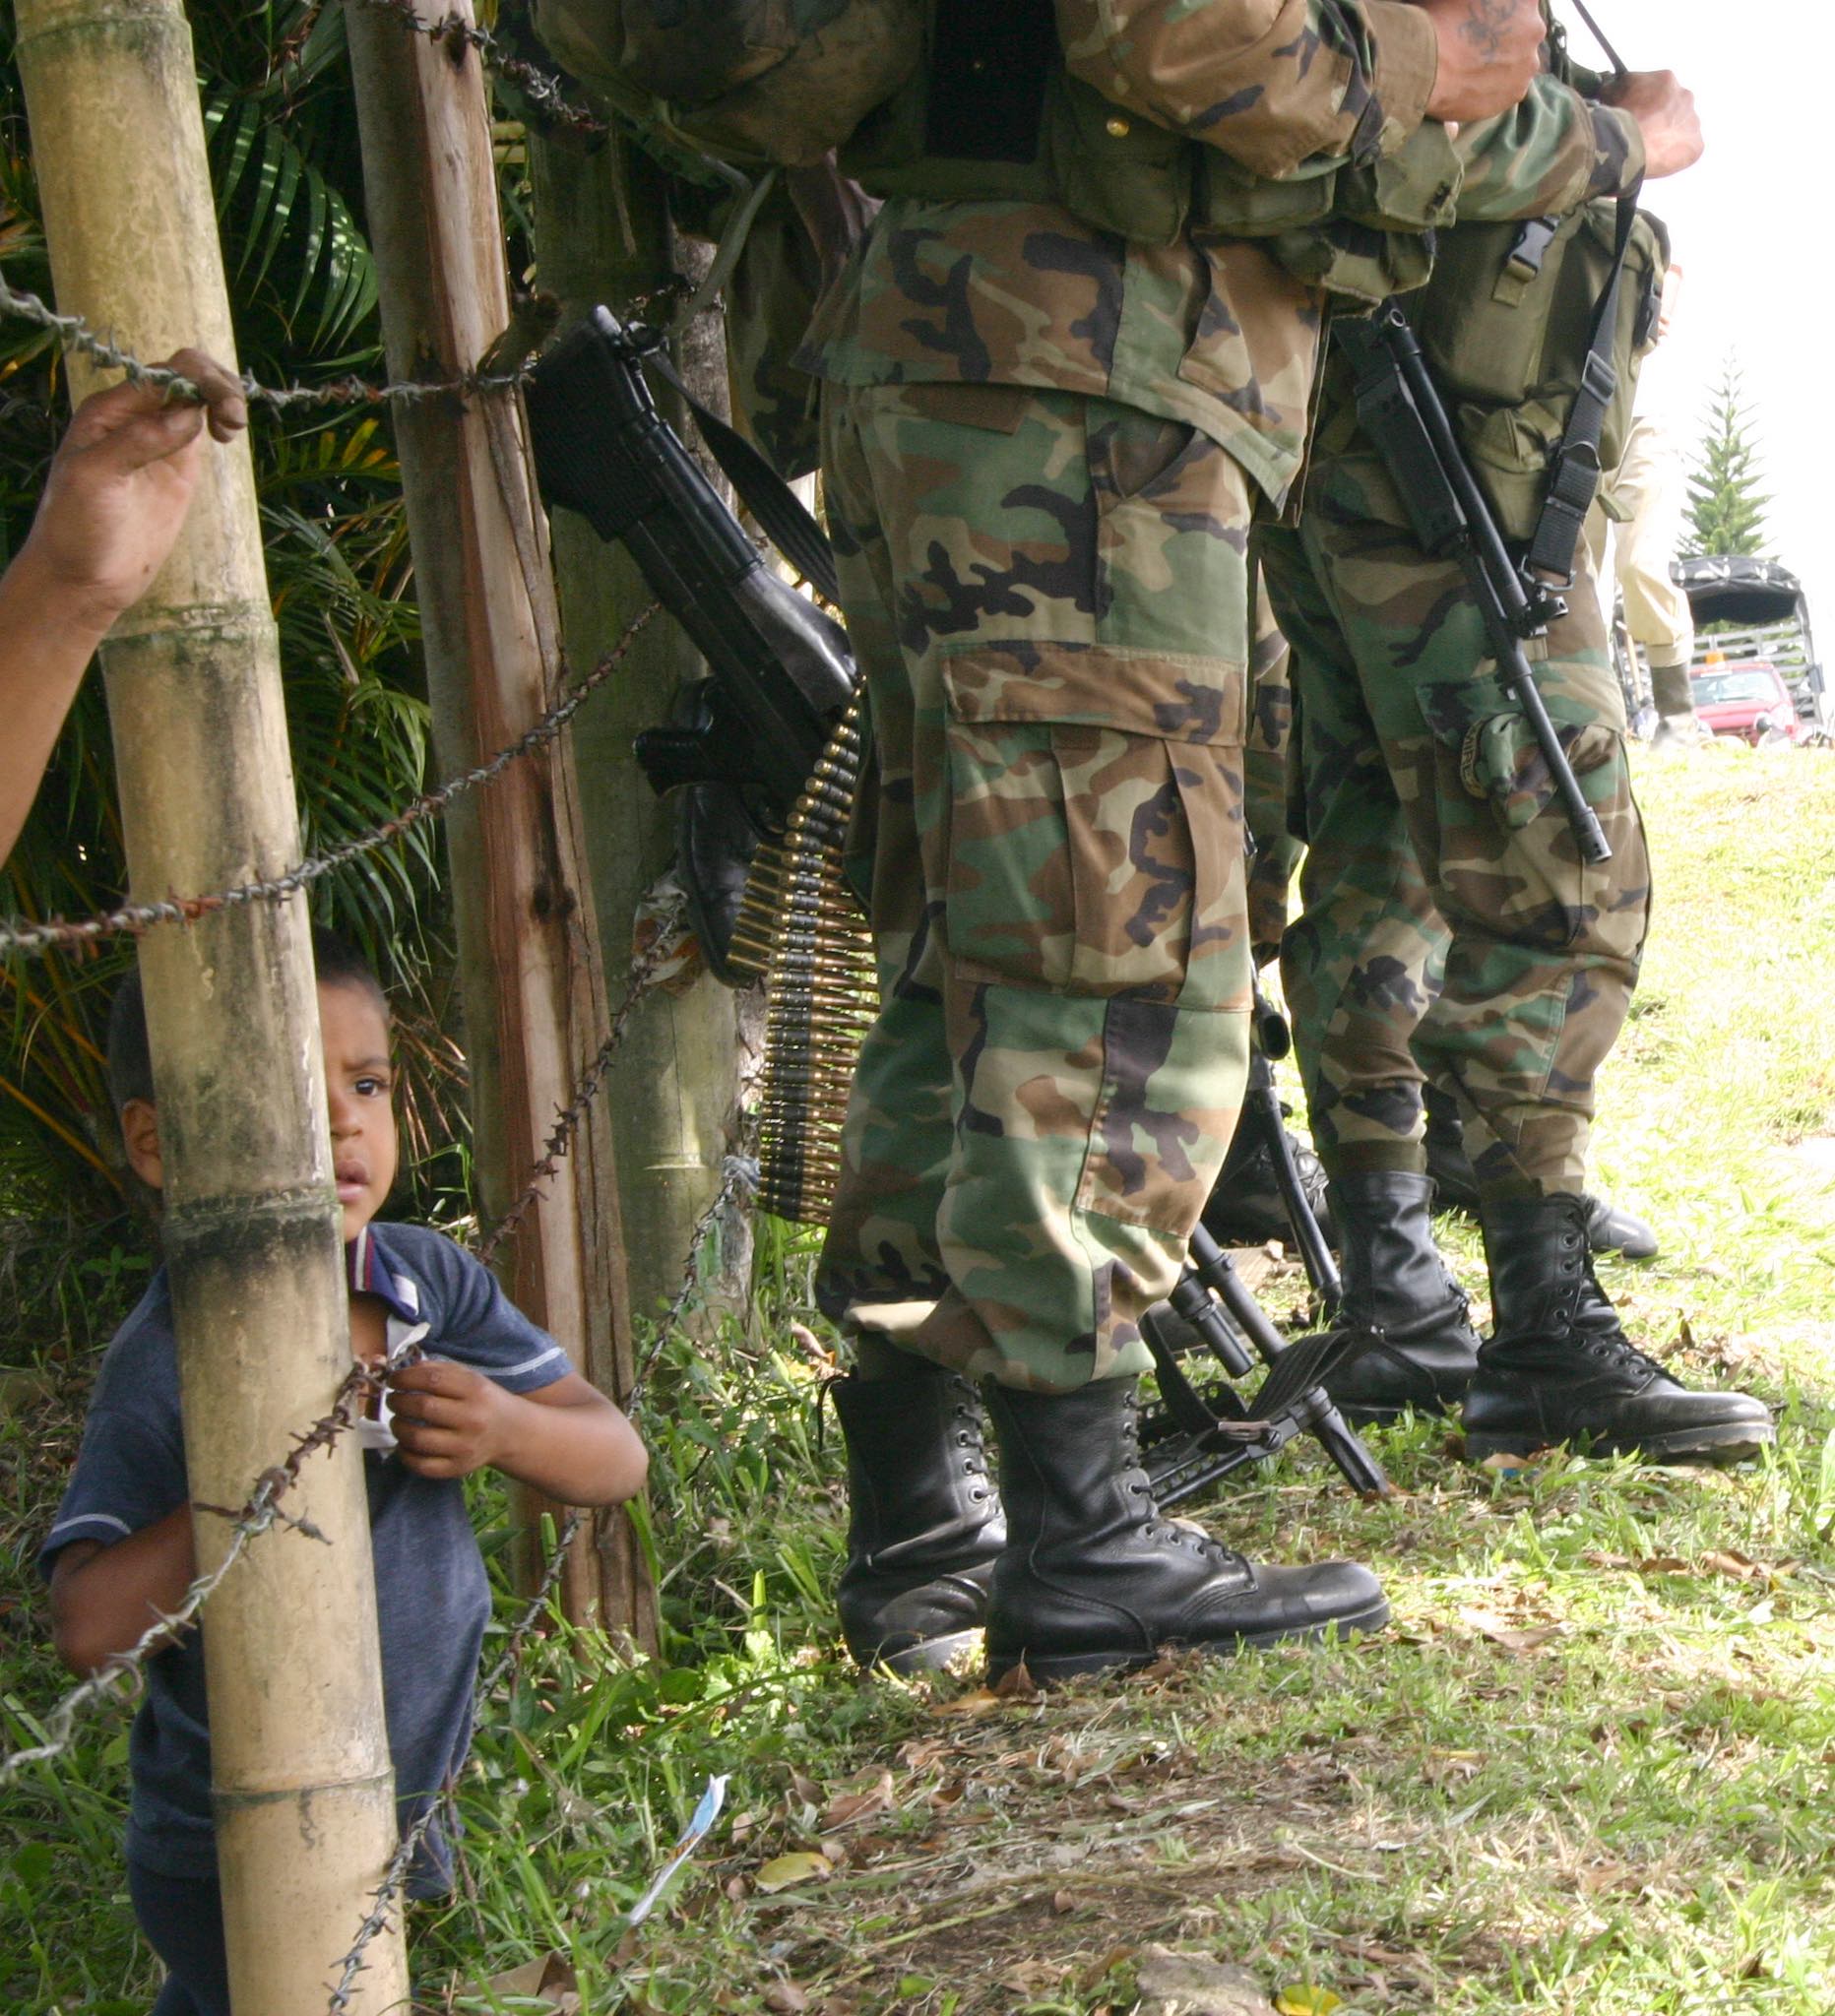 Colombian child and soldiers